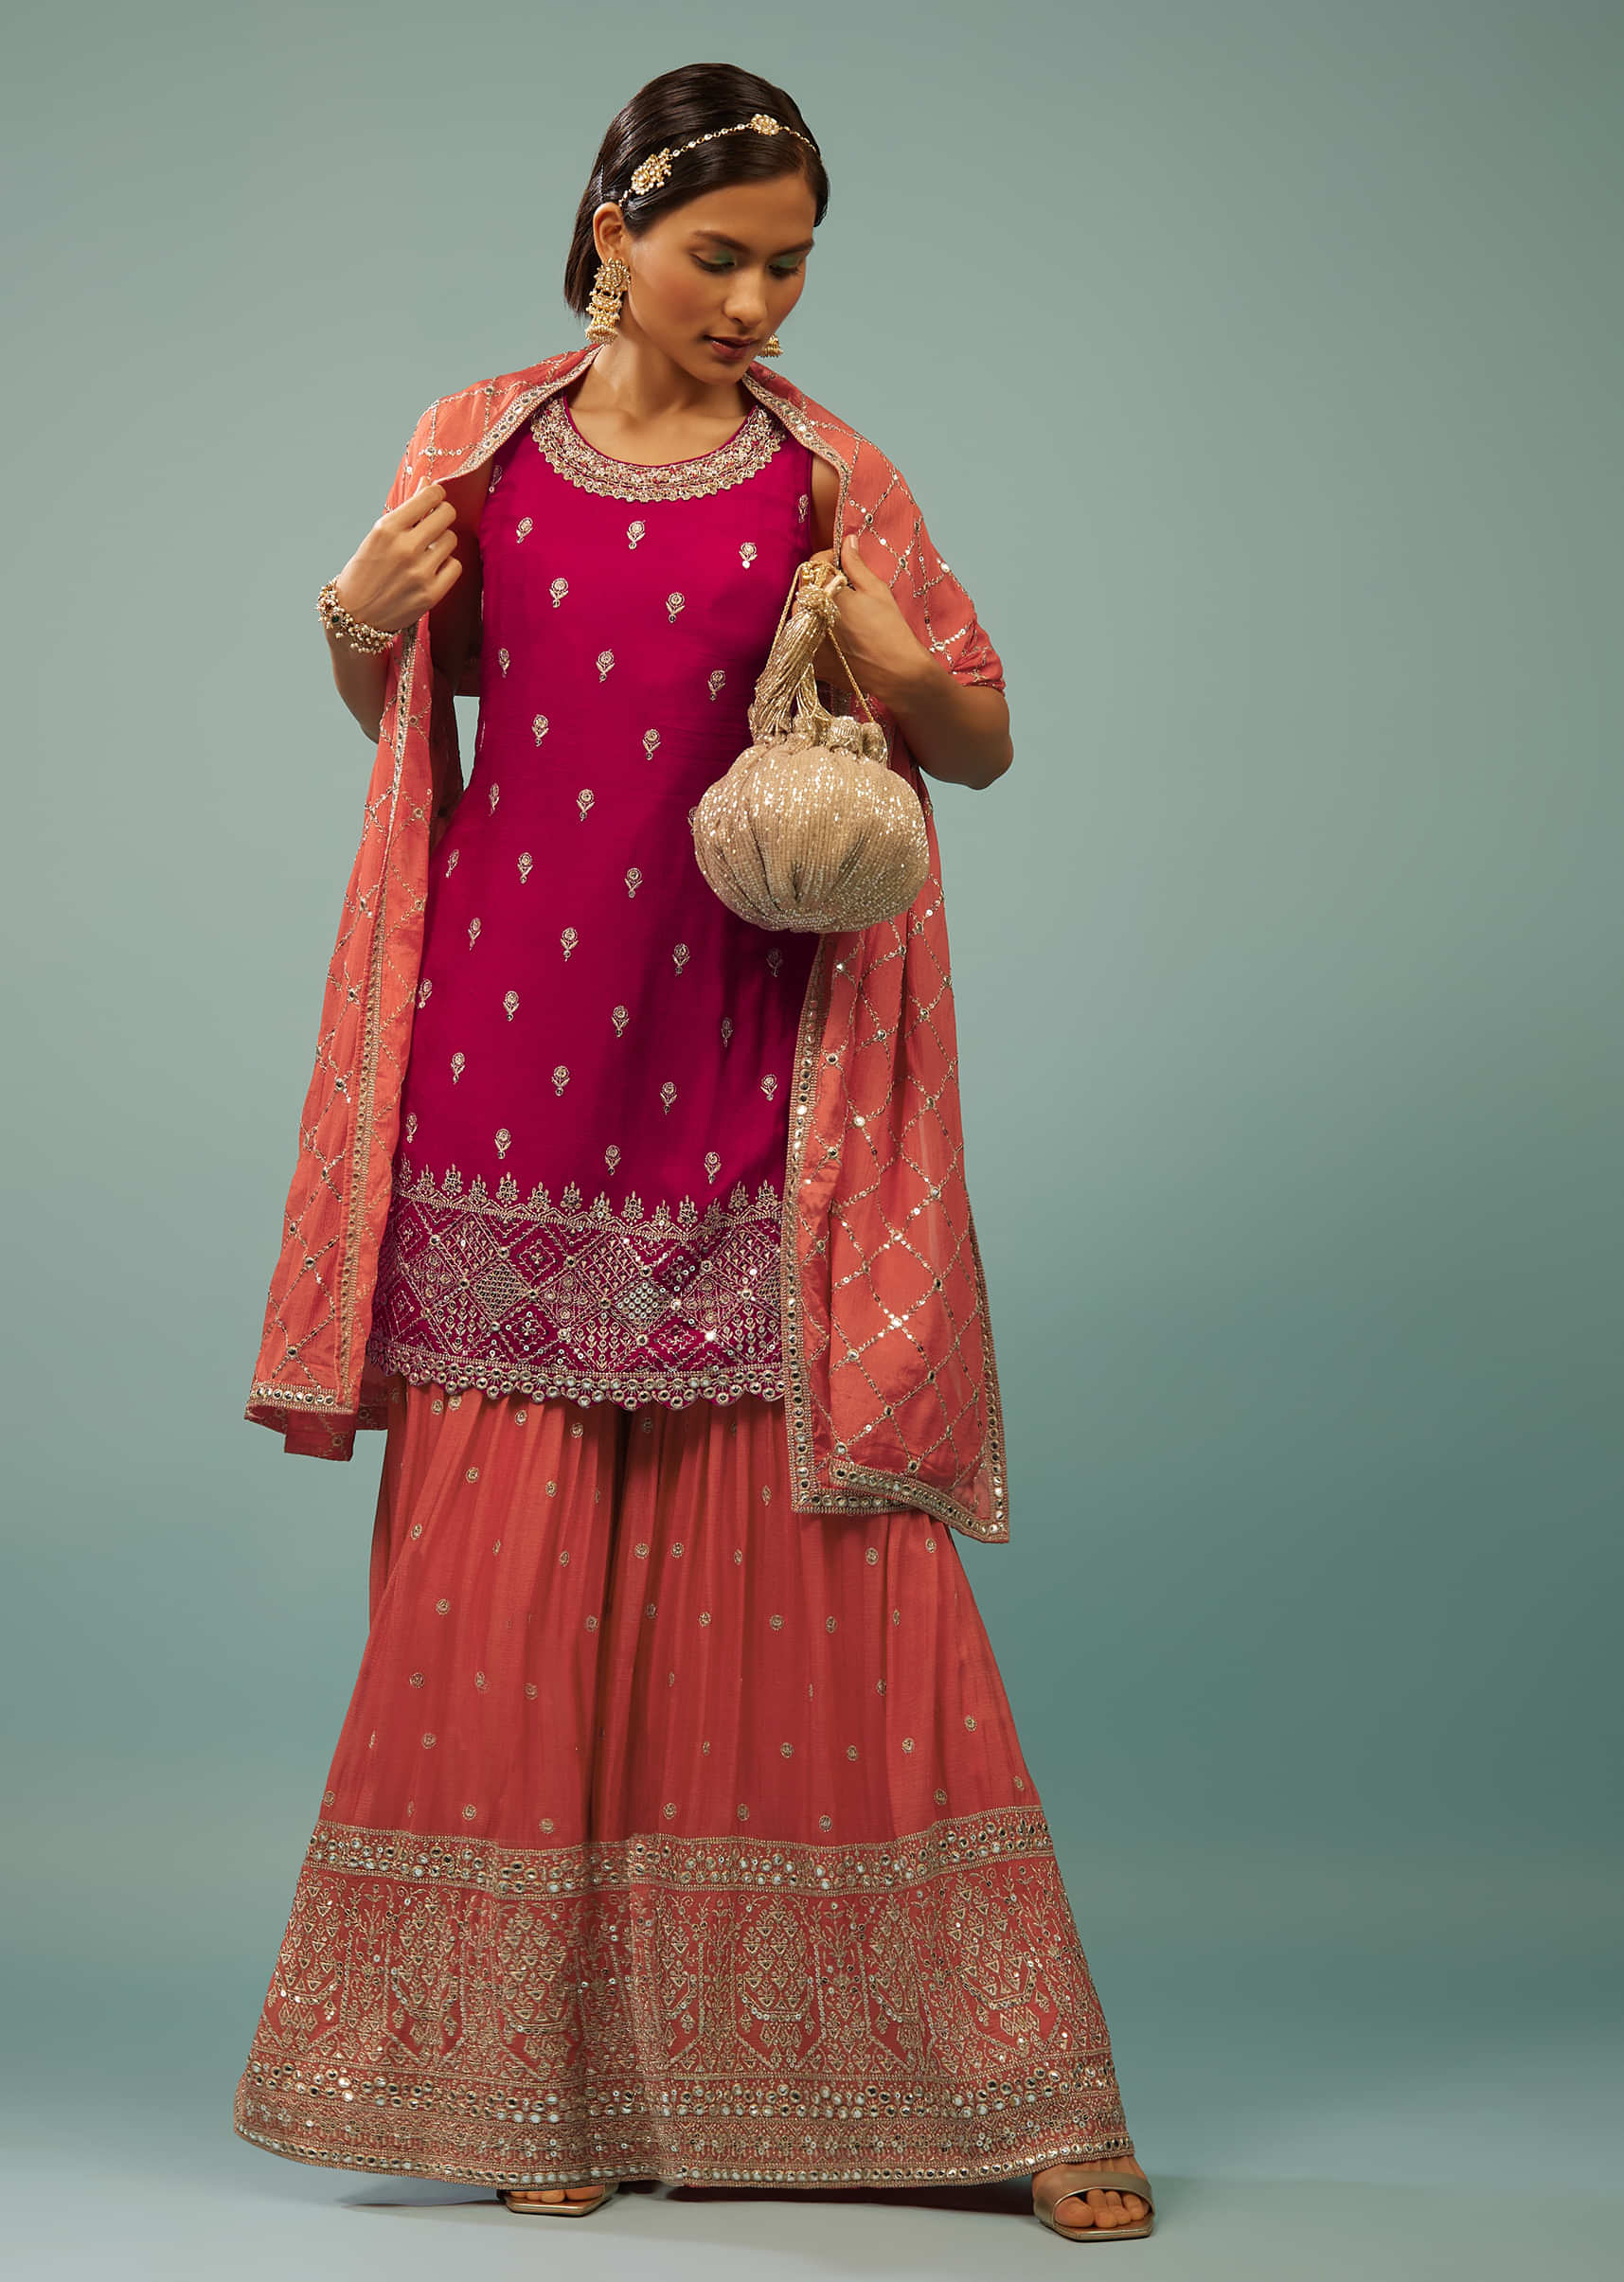 Hot Pink Sharara Suit With Embroidery